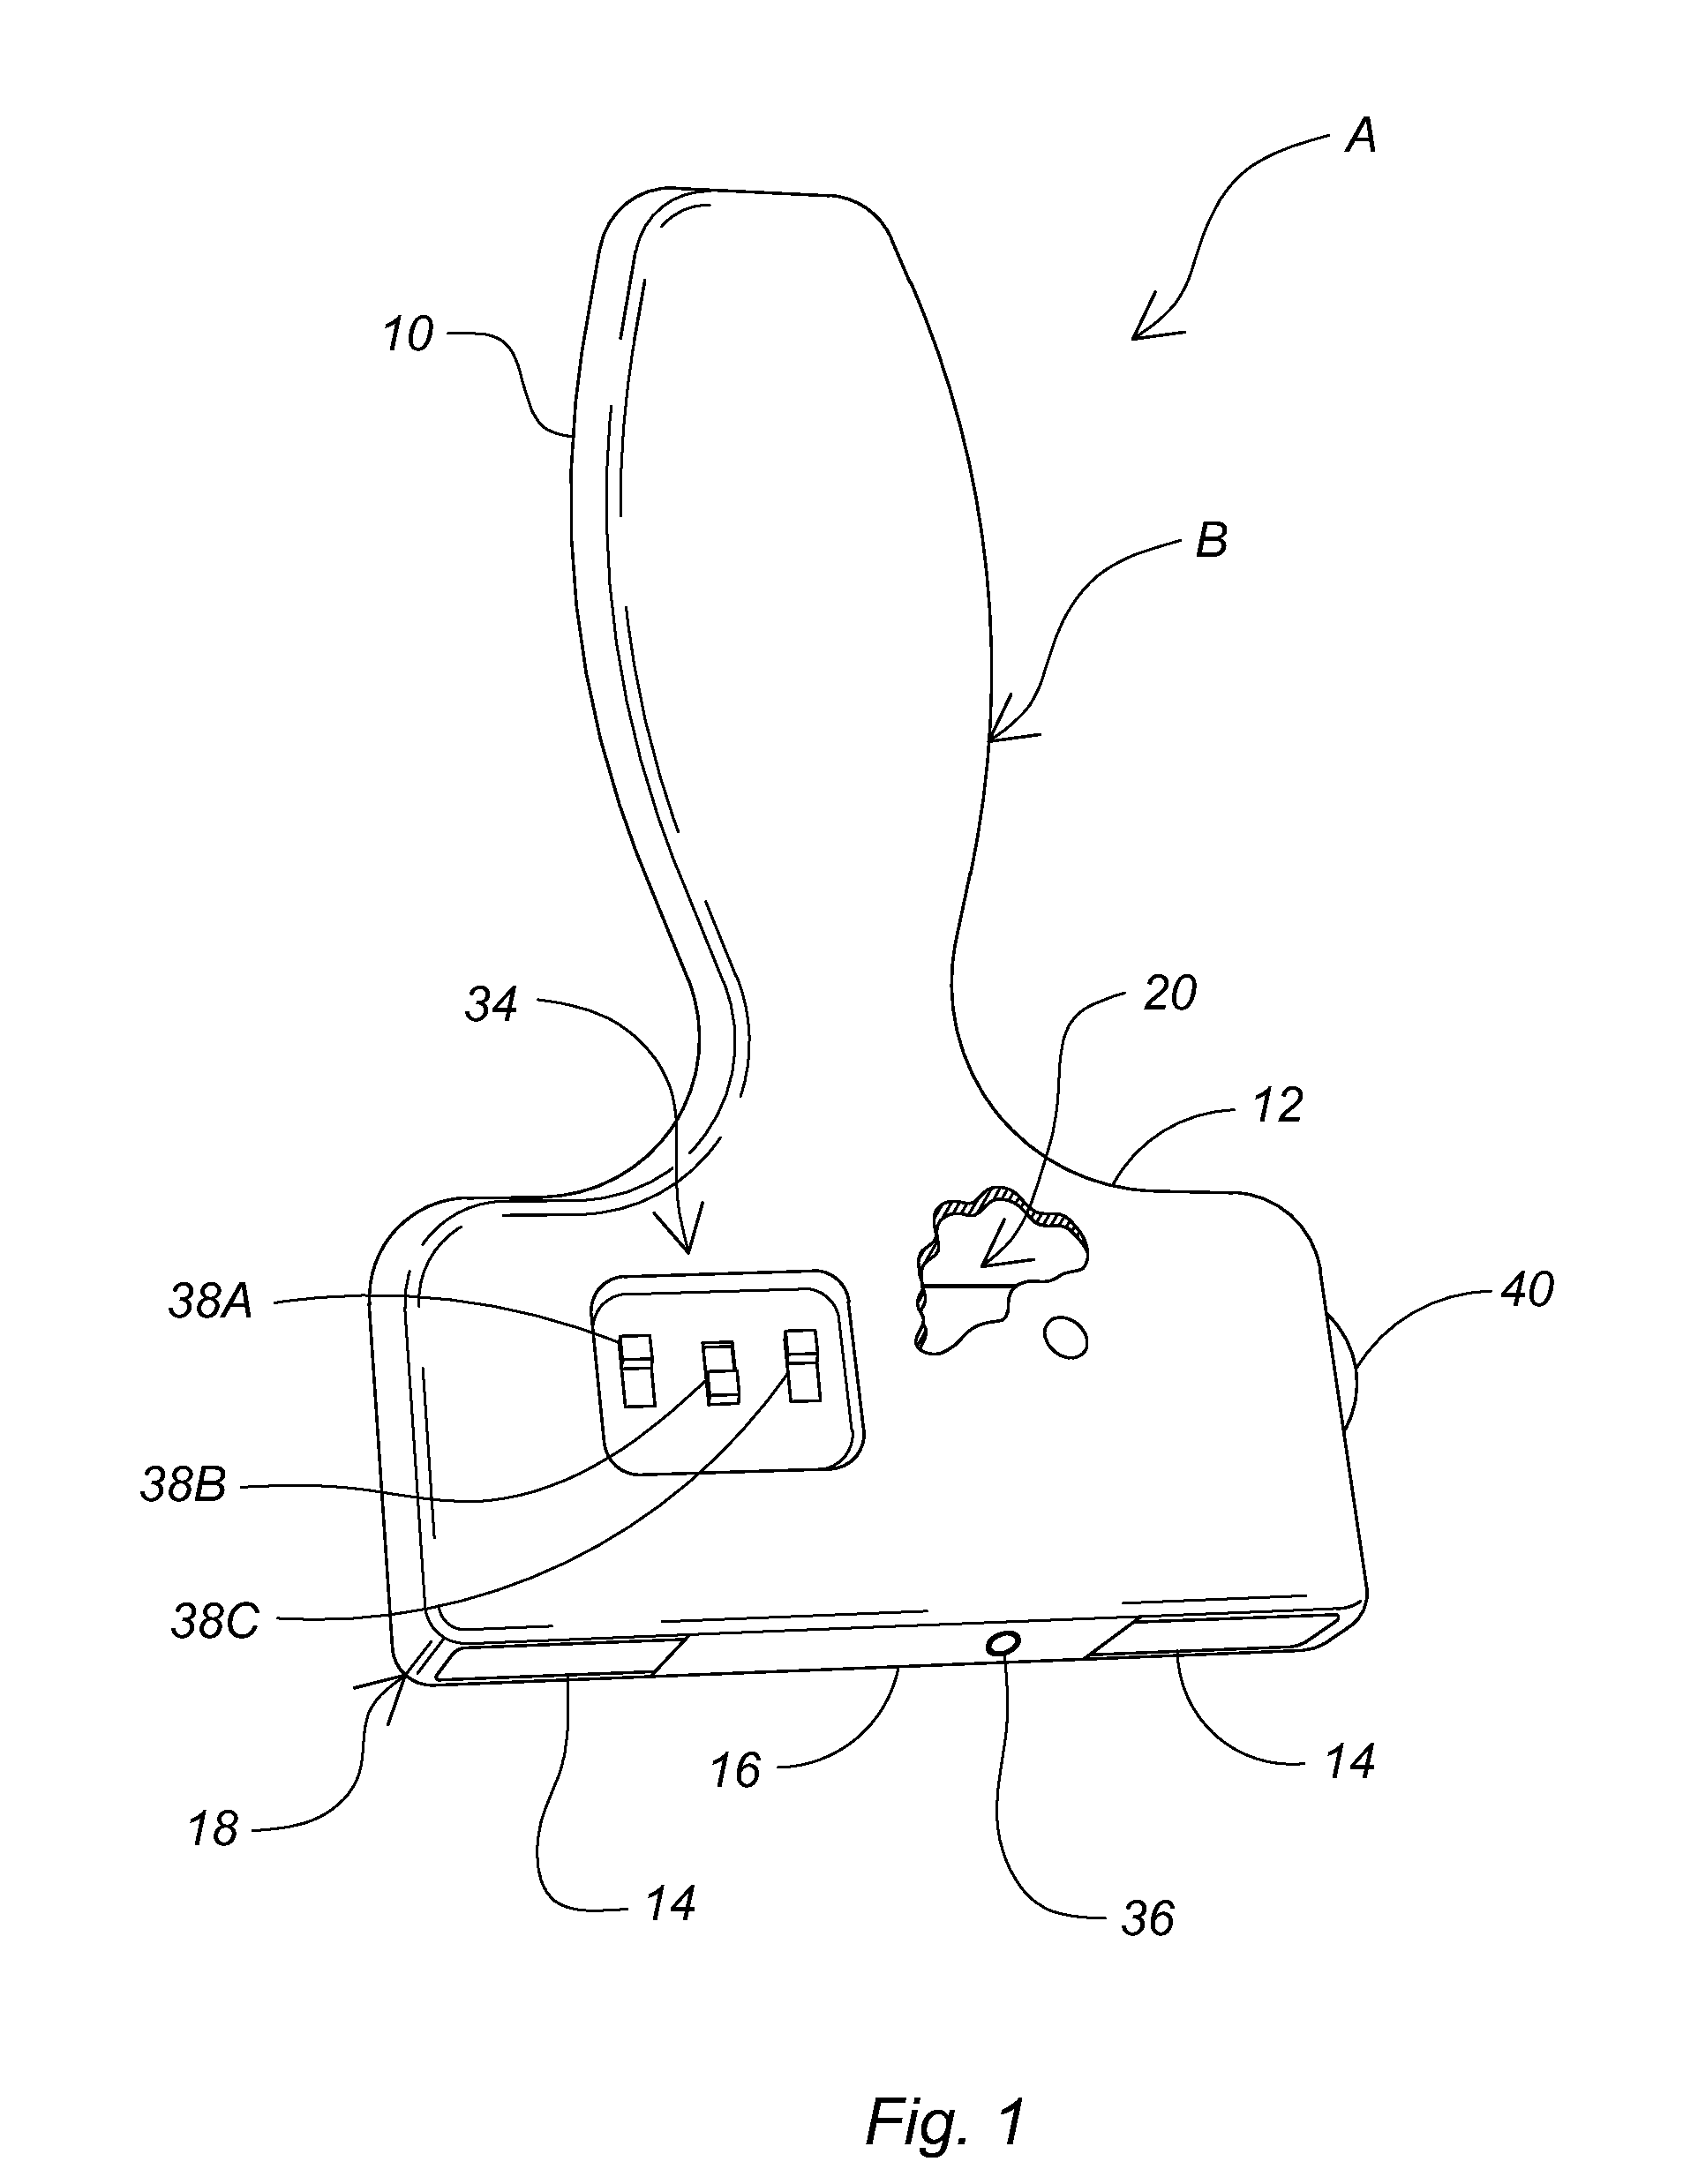 Applicator Head and Method for Treatment of Pain by Transcutaneous Electrical Nerve Stimulation